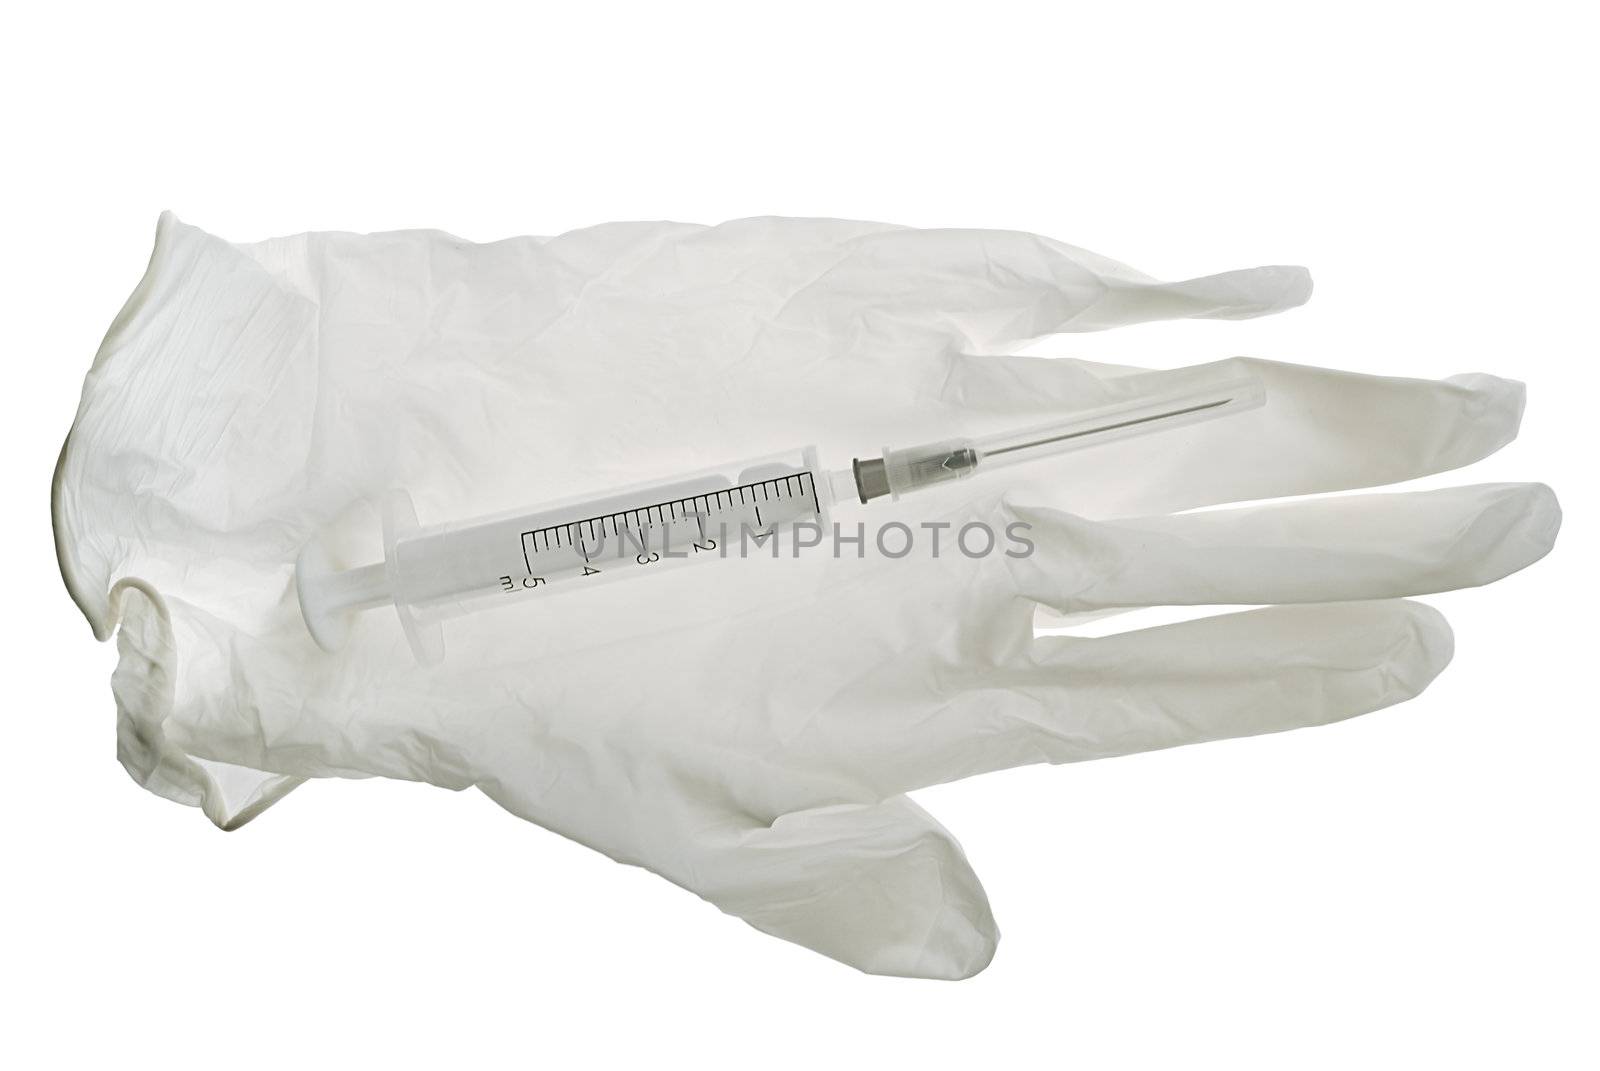 glove and syringe on a white background